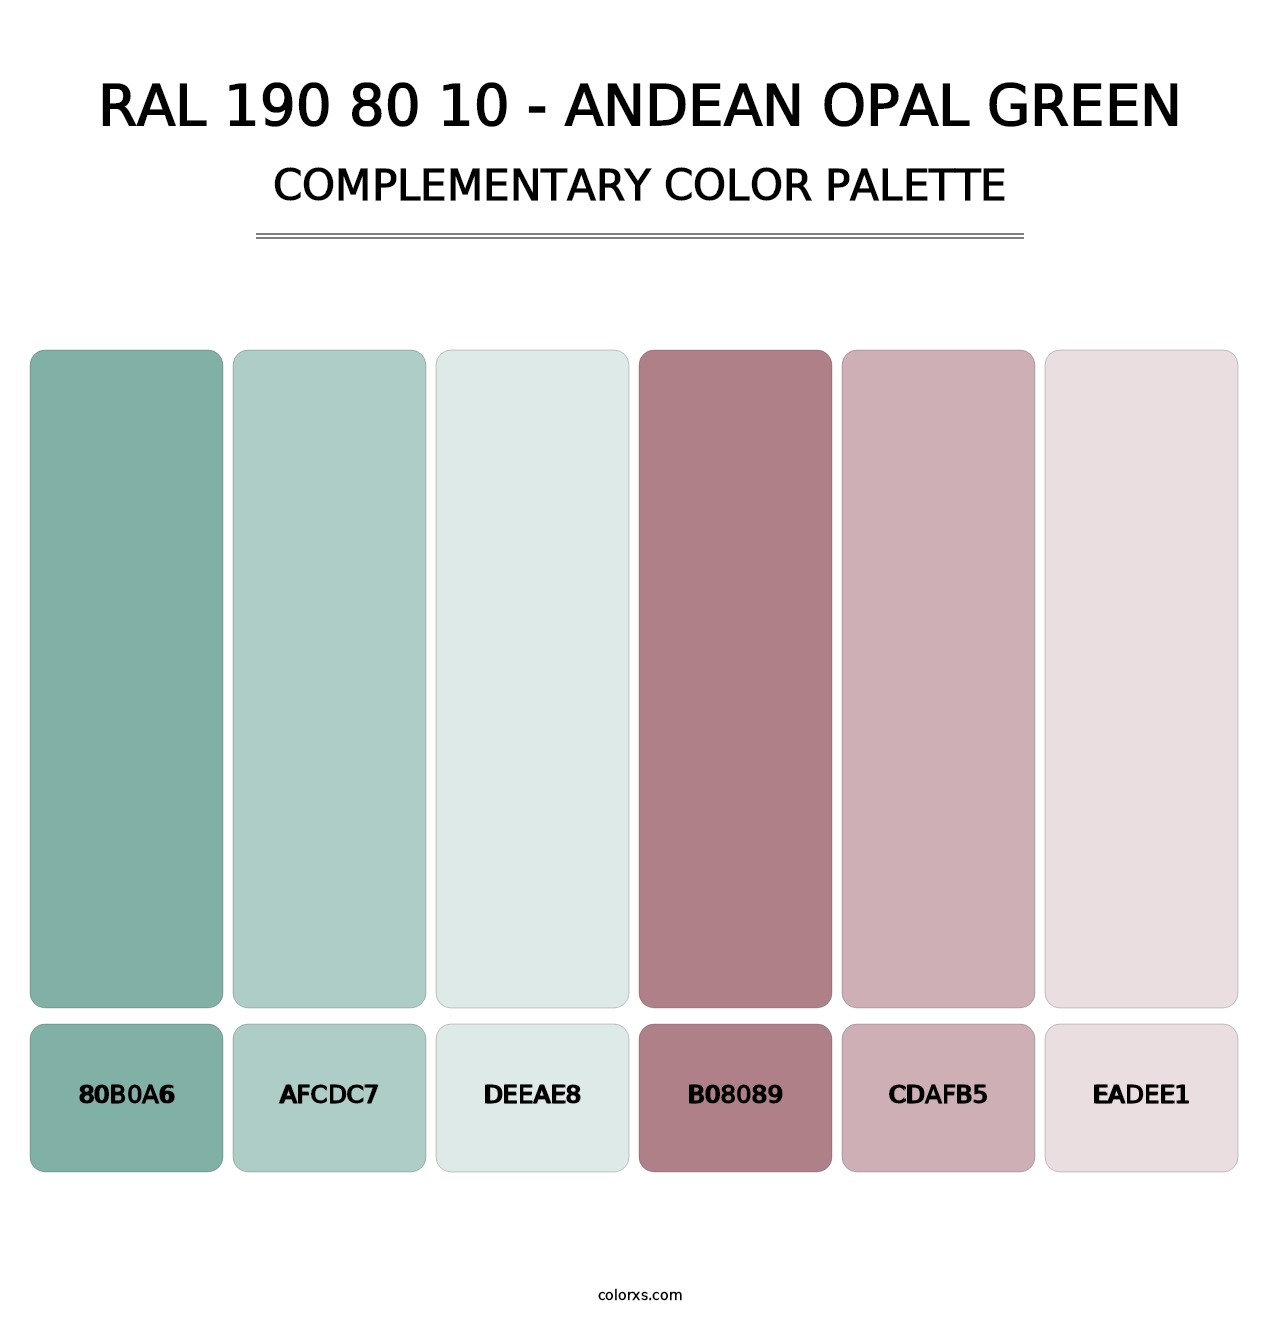 RAL 190 80 10 - Andean Opal Green - Complementary Color Palette